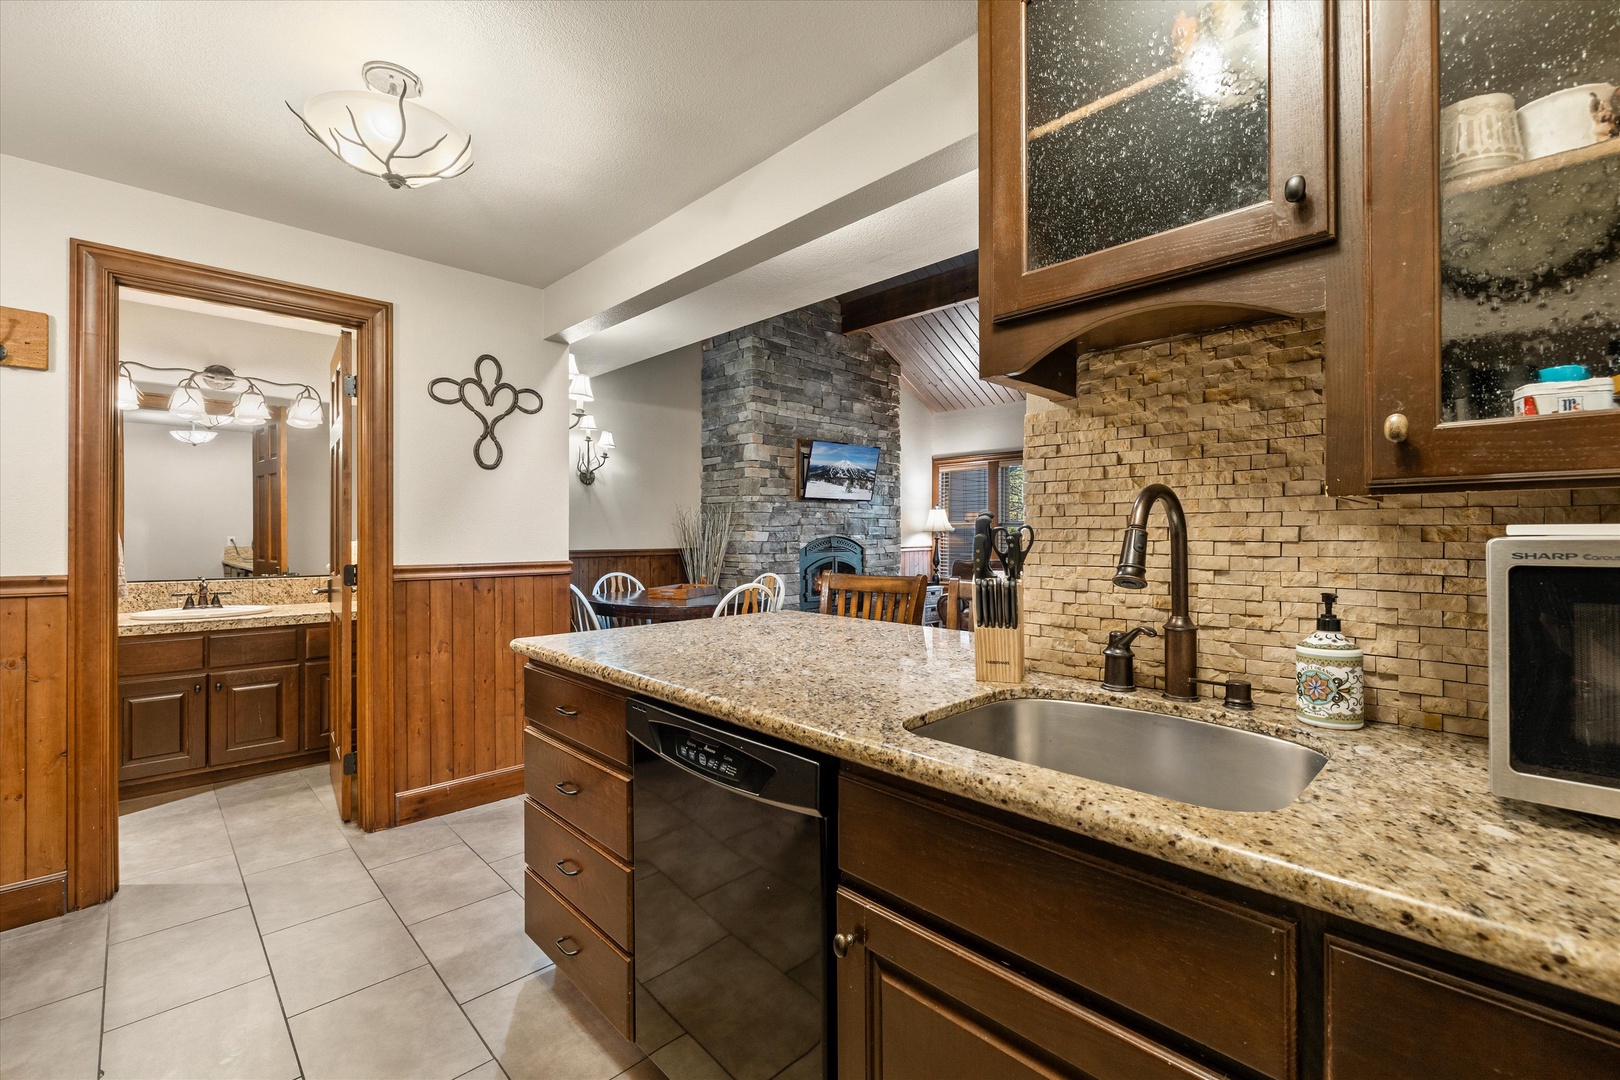 The updated kitchen offers ample space & all the comforts of home